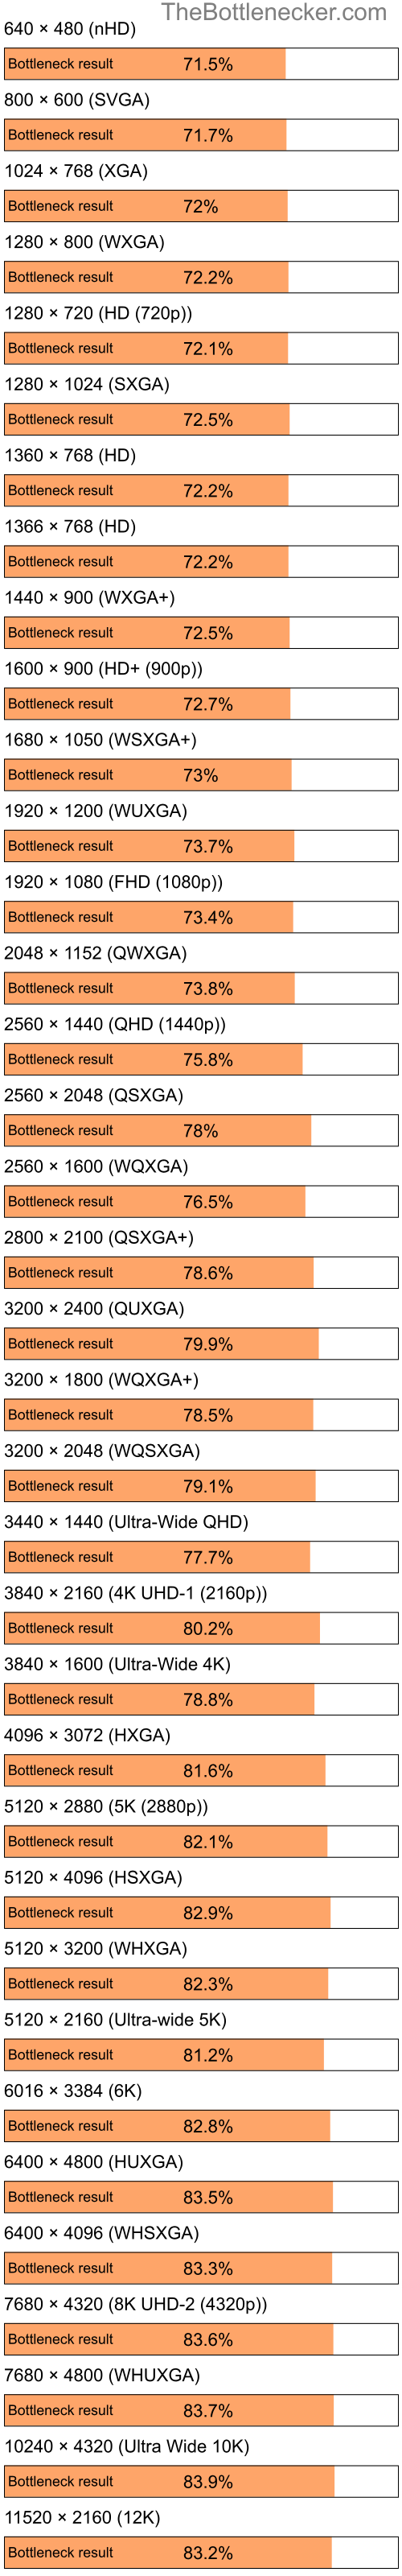 Bottleneck results by resolution for Intel Celeron and AMD Radeon 3100 in Graphic Card Intense Tasks